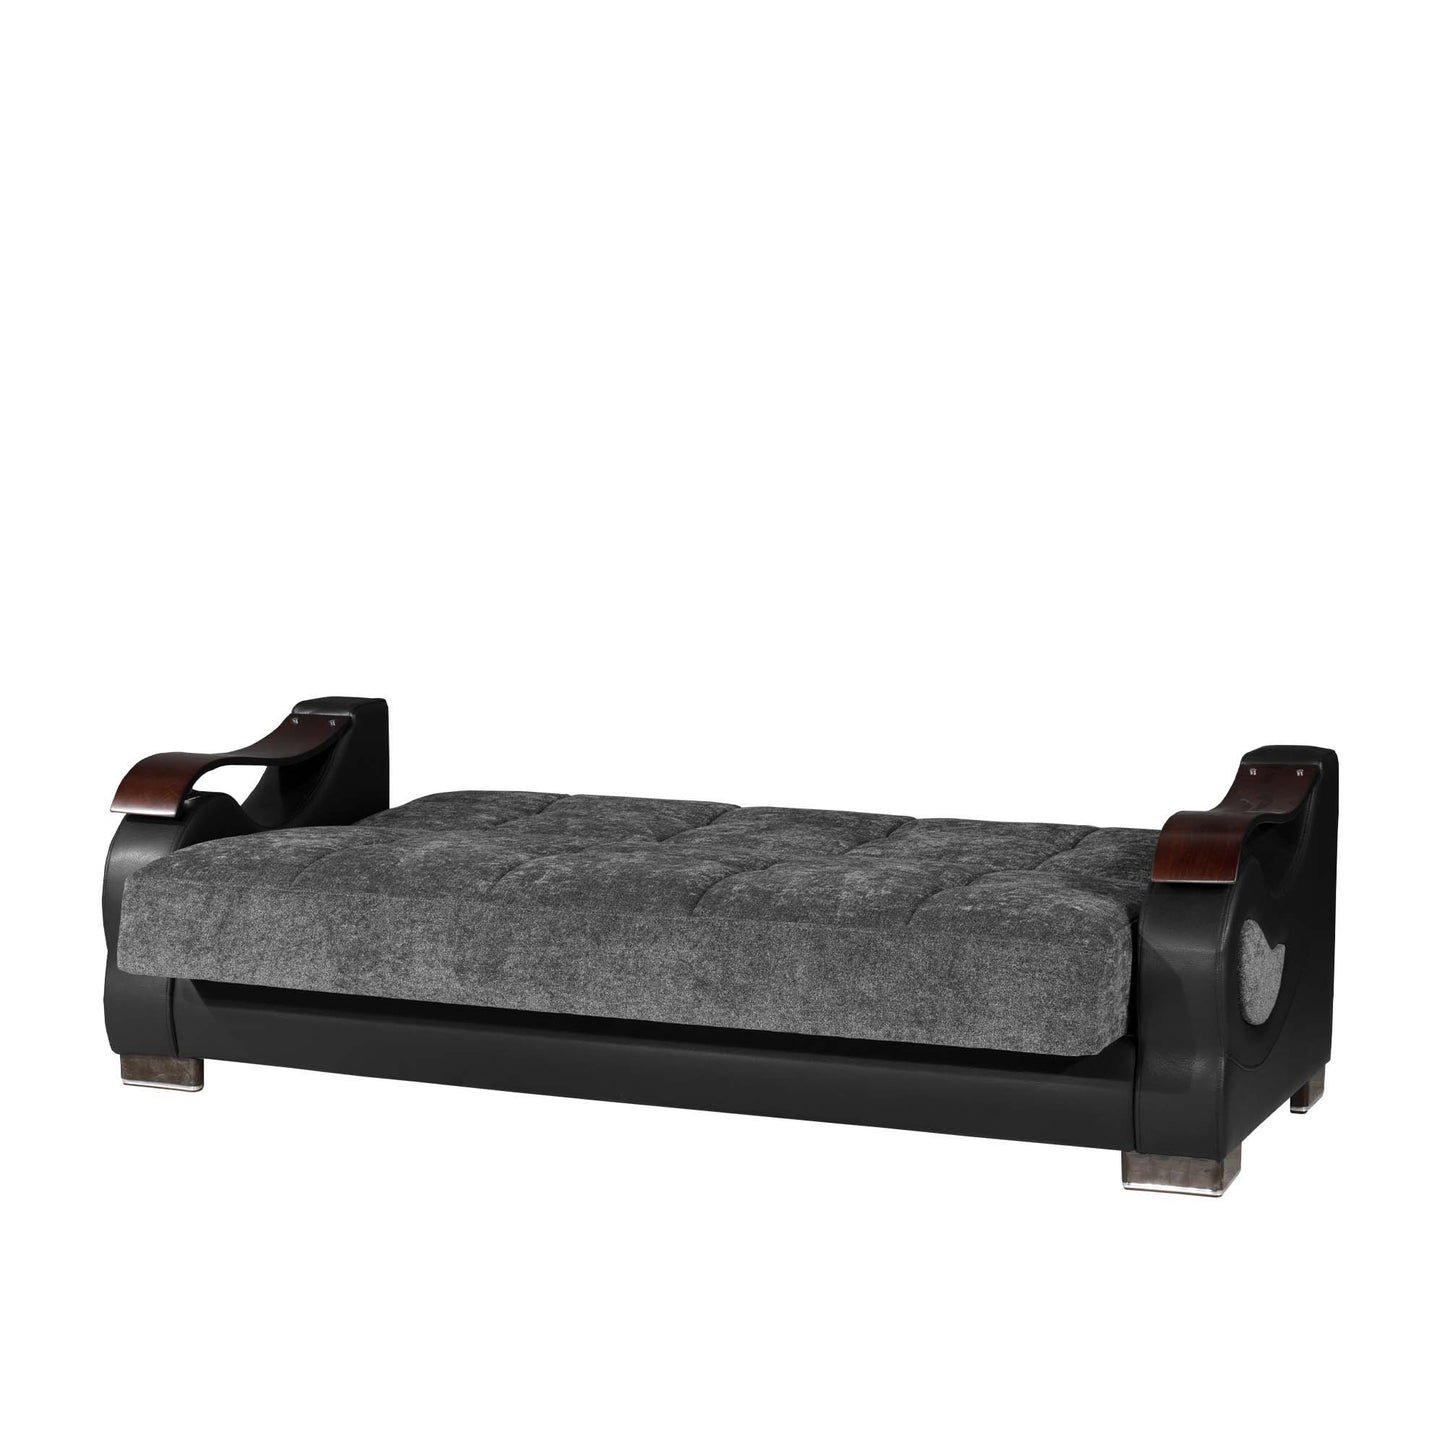 Ottomanson Metroplex Convertible Sofabed